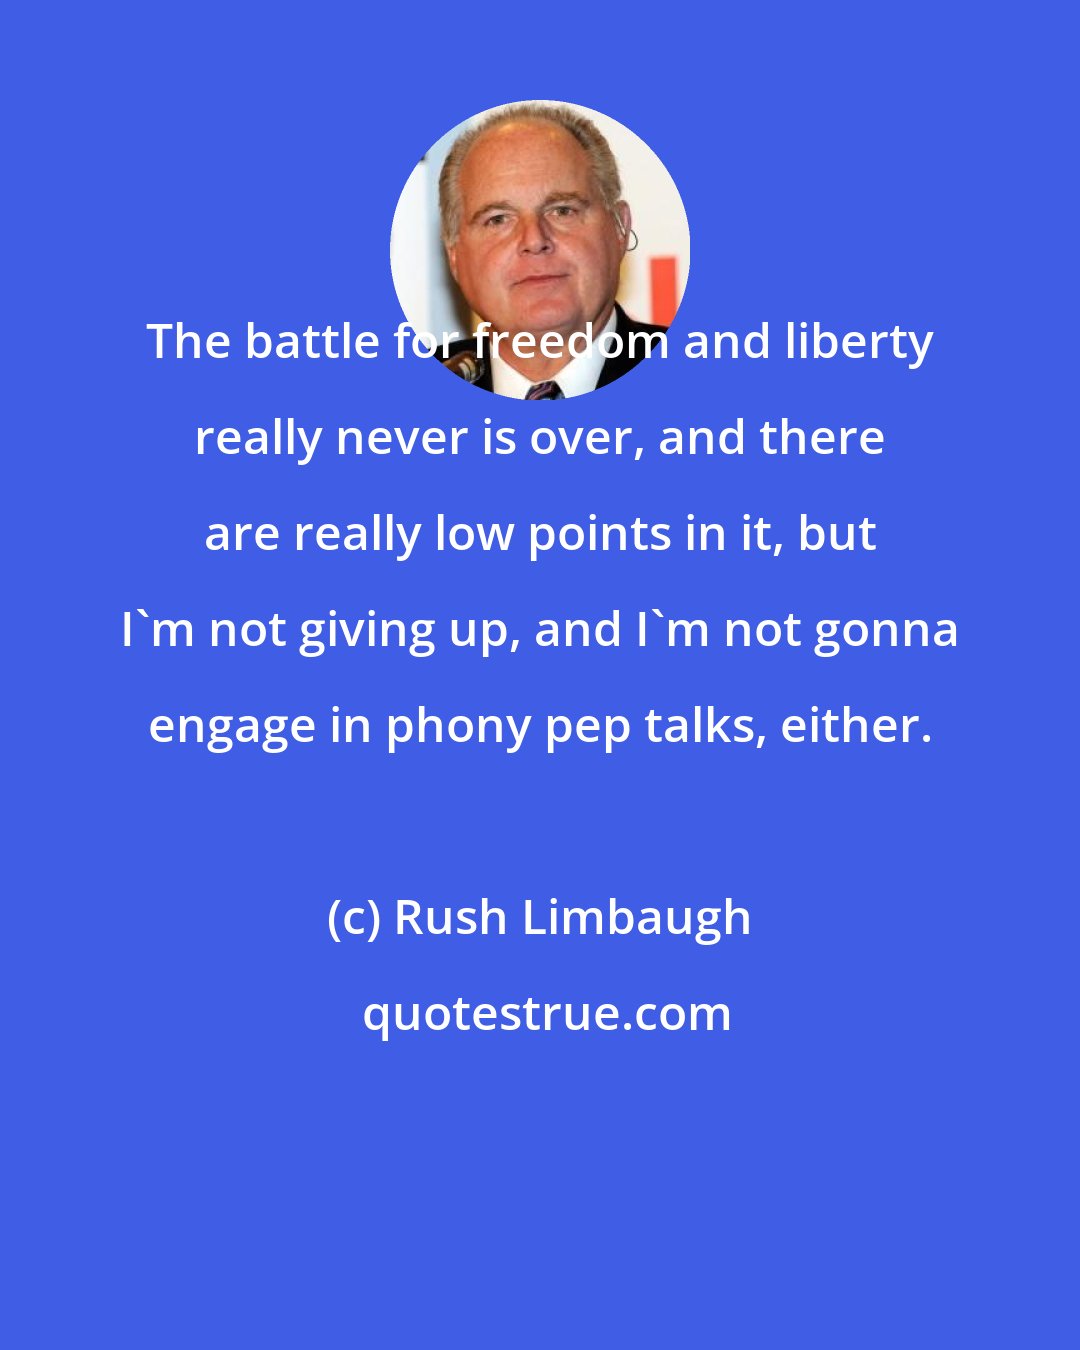 Rush Limbaugh: The battle for freedom and liberty really never is over, and there are really low points in it, but I'm not giving up, and I'm not gonna engage in phony pep talks, either.